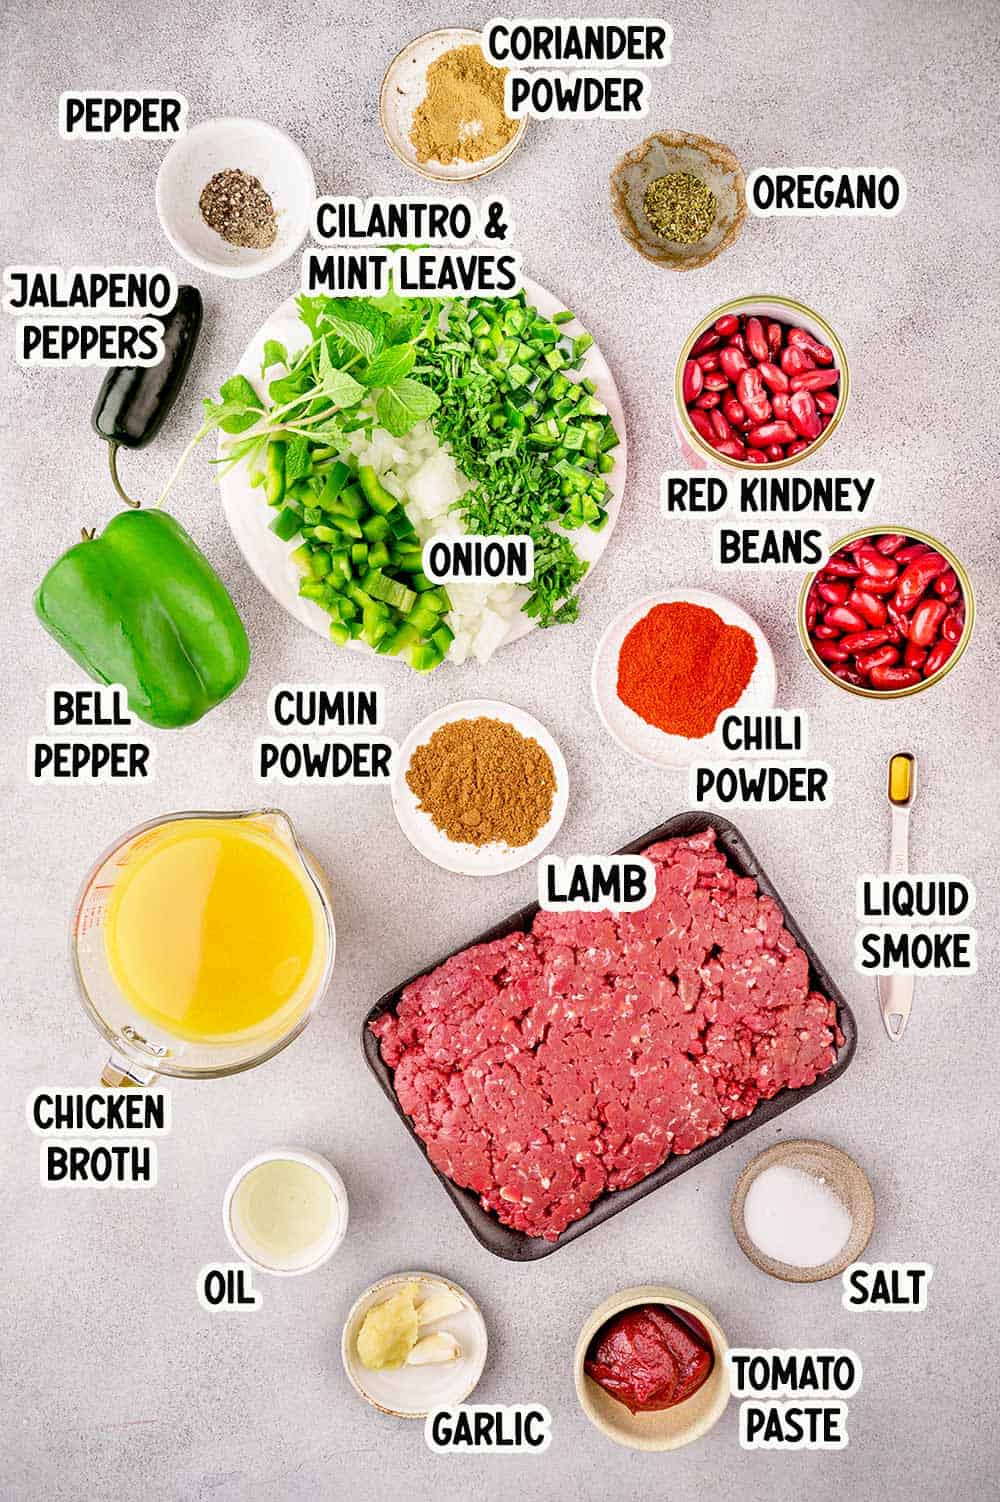 Ingredients to make lamb chili from scratch.